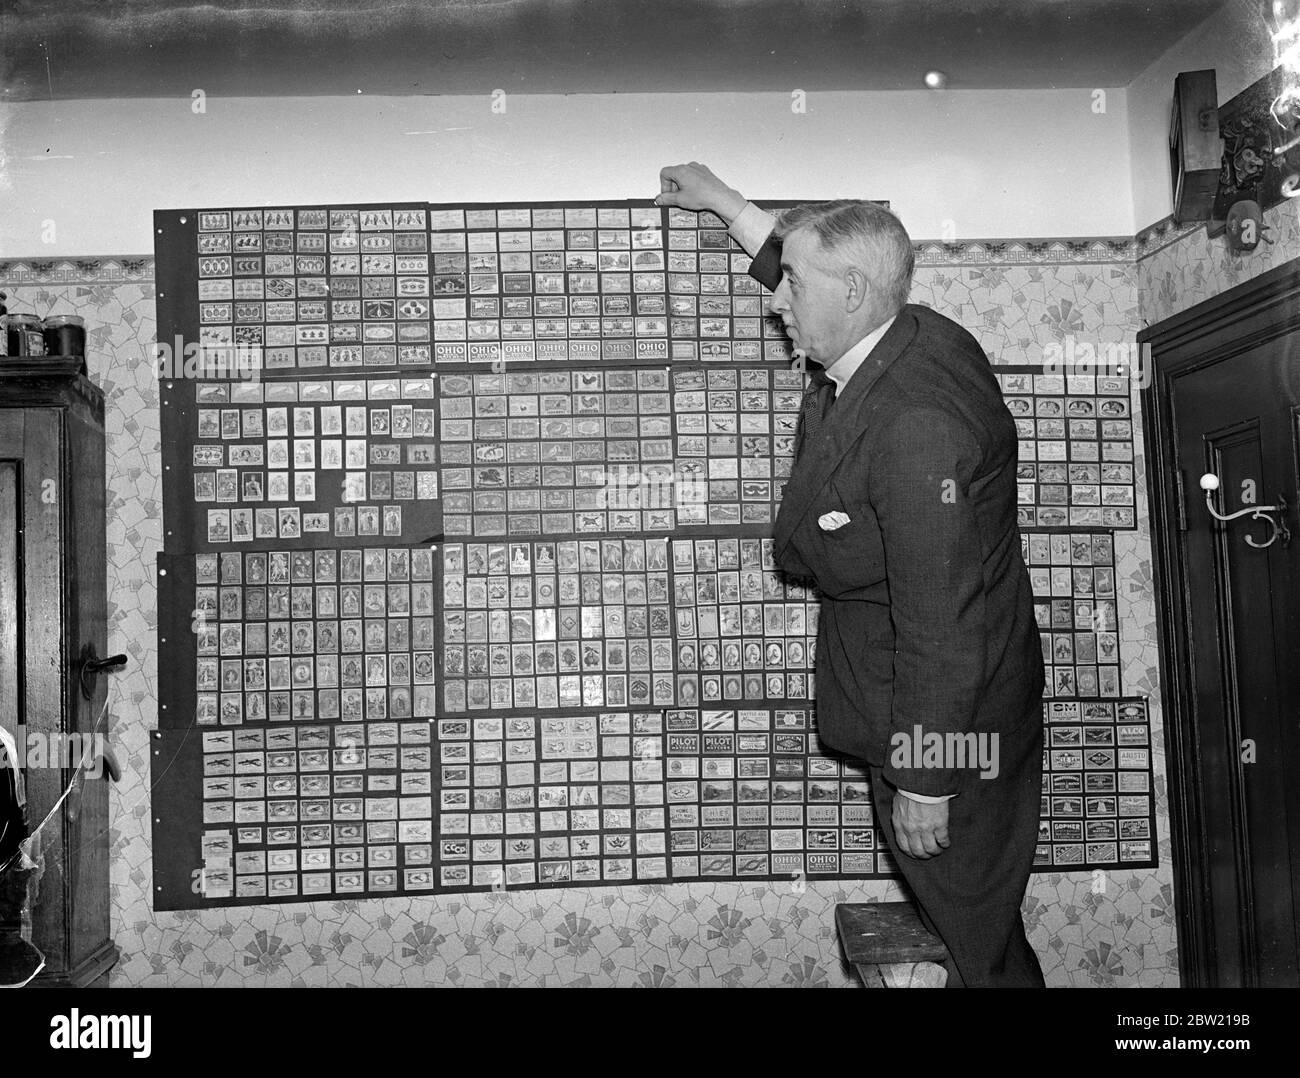 Mr S H Toole with some of his rare matchbox labels at his Southampton home will stop he has collected 15,000 matchbox labels in this 16 years since he commenced his curious hobby in 1921. He is now planning to hold an exhibition of match box-label collections in London. 13 August 1937. Stock Photo